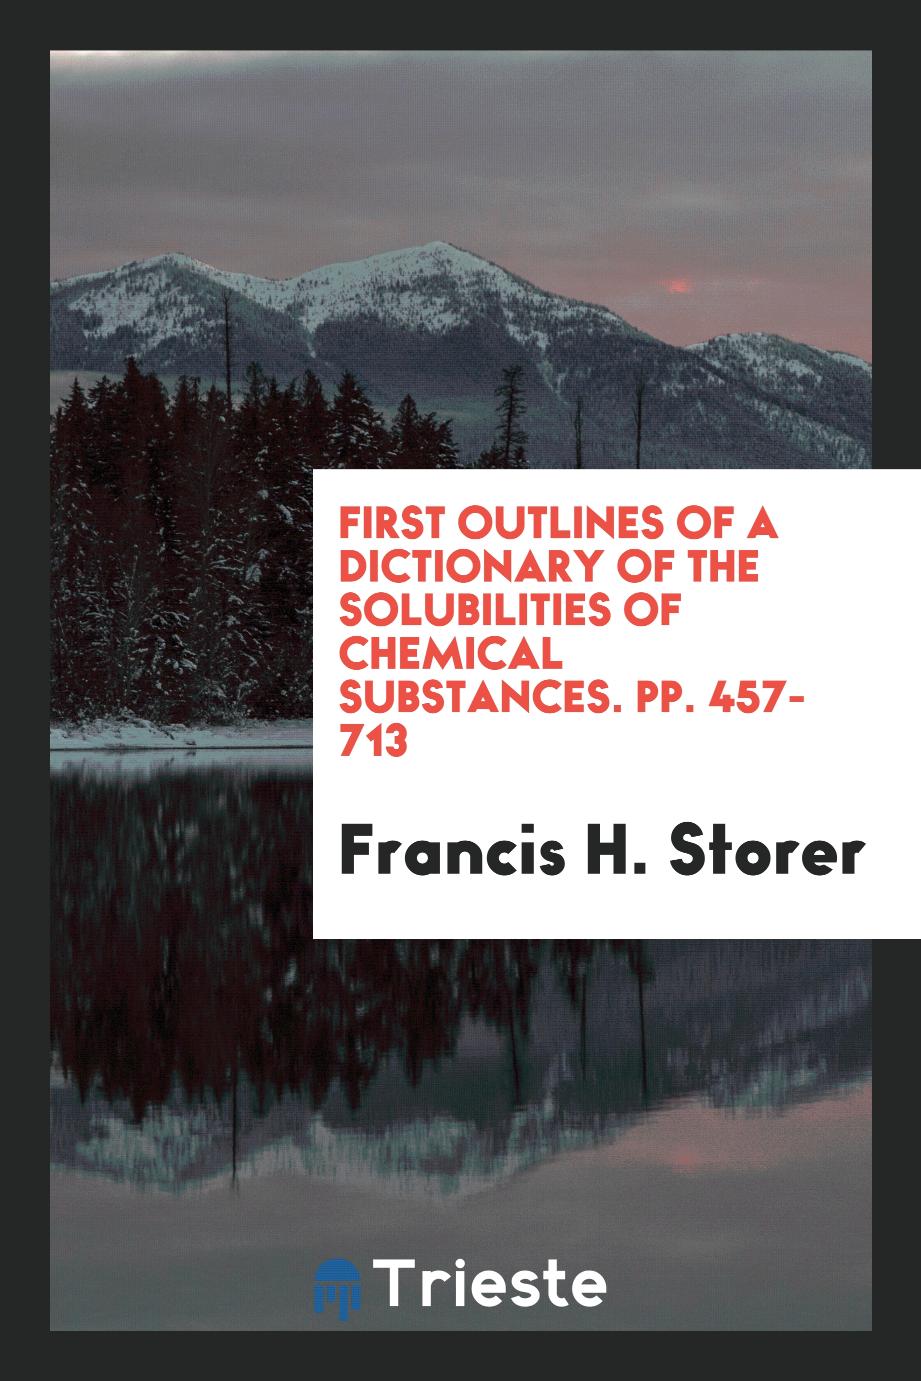 First outlines of a dictionary of the solubilities of chemical substances. pp. 457-713